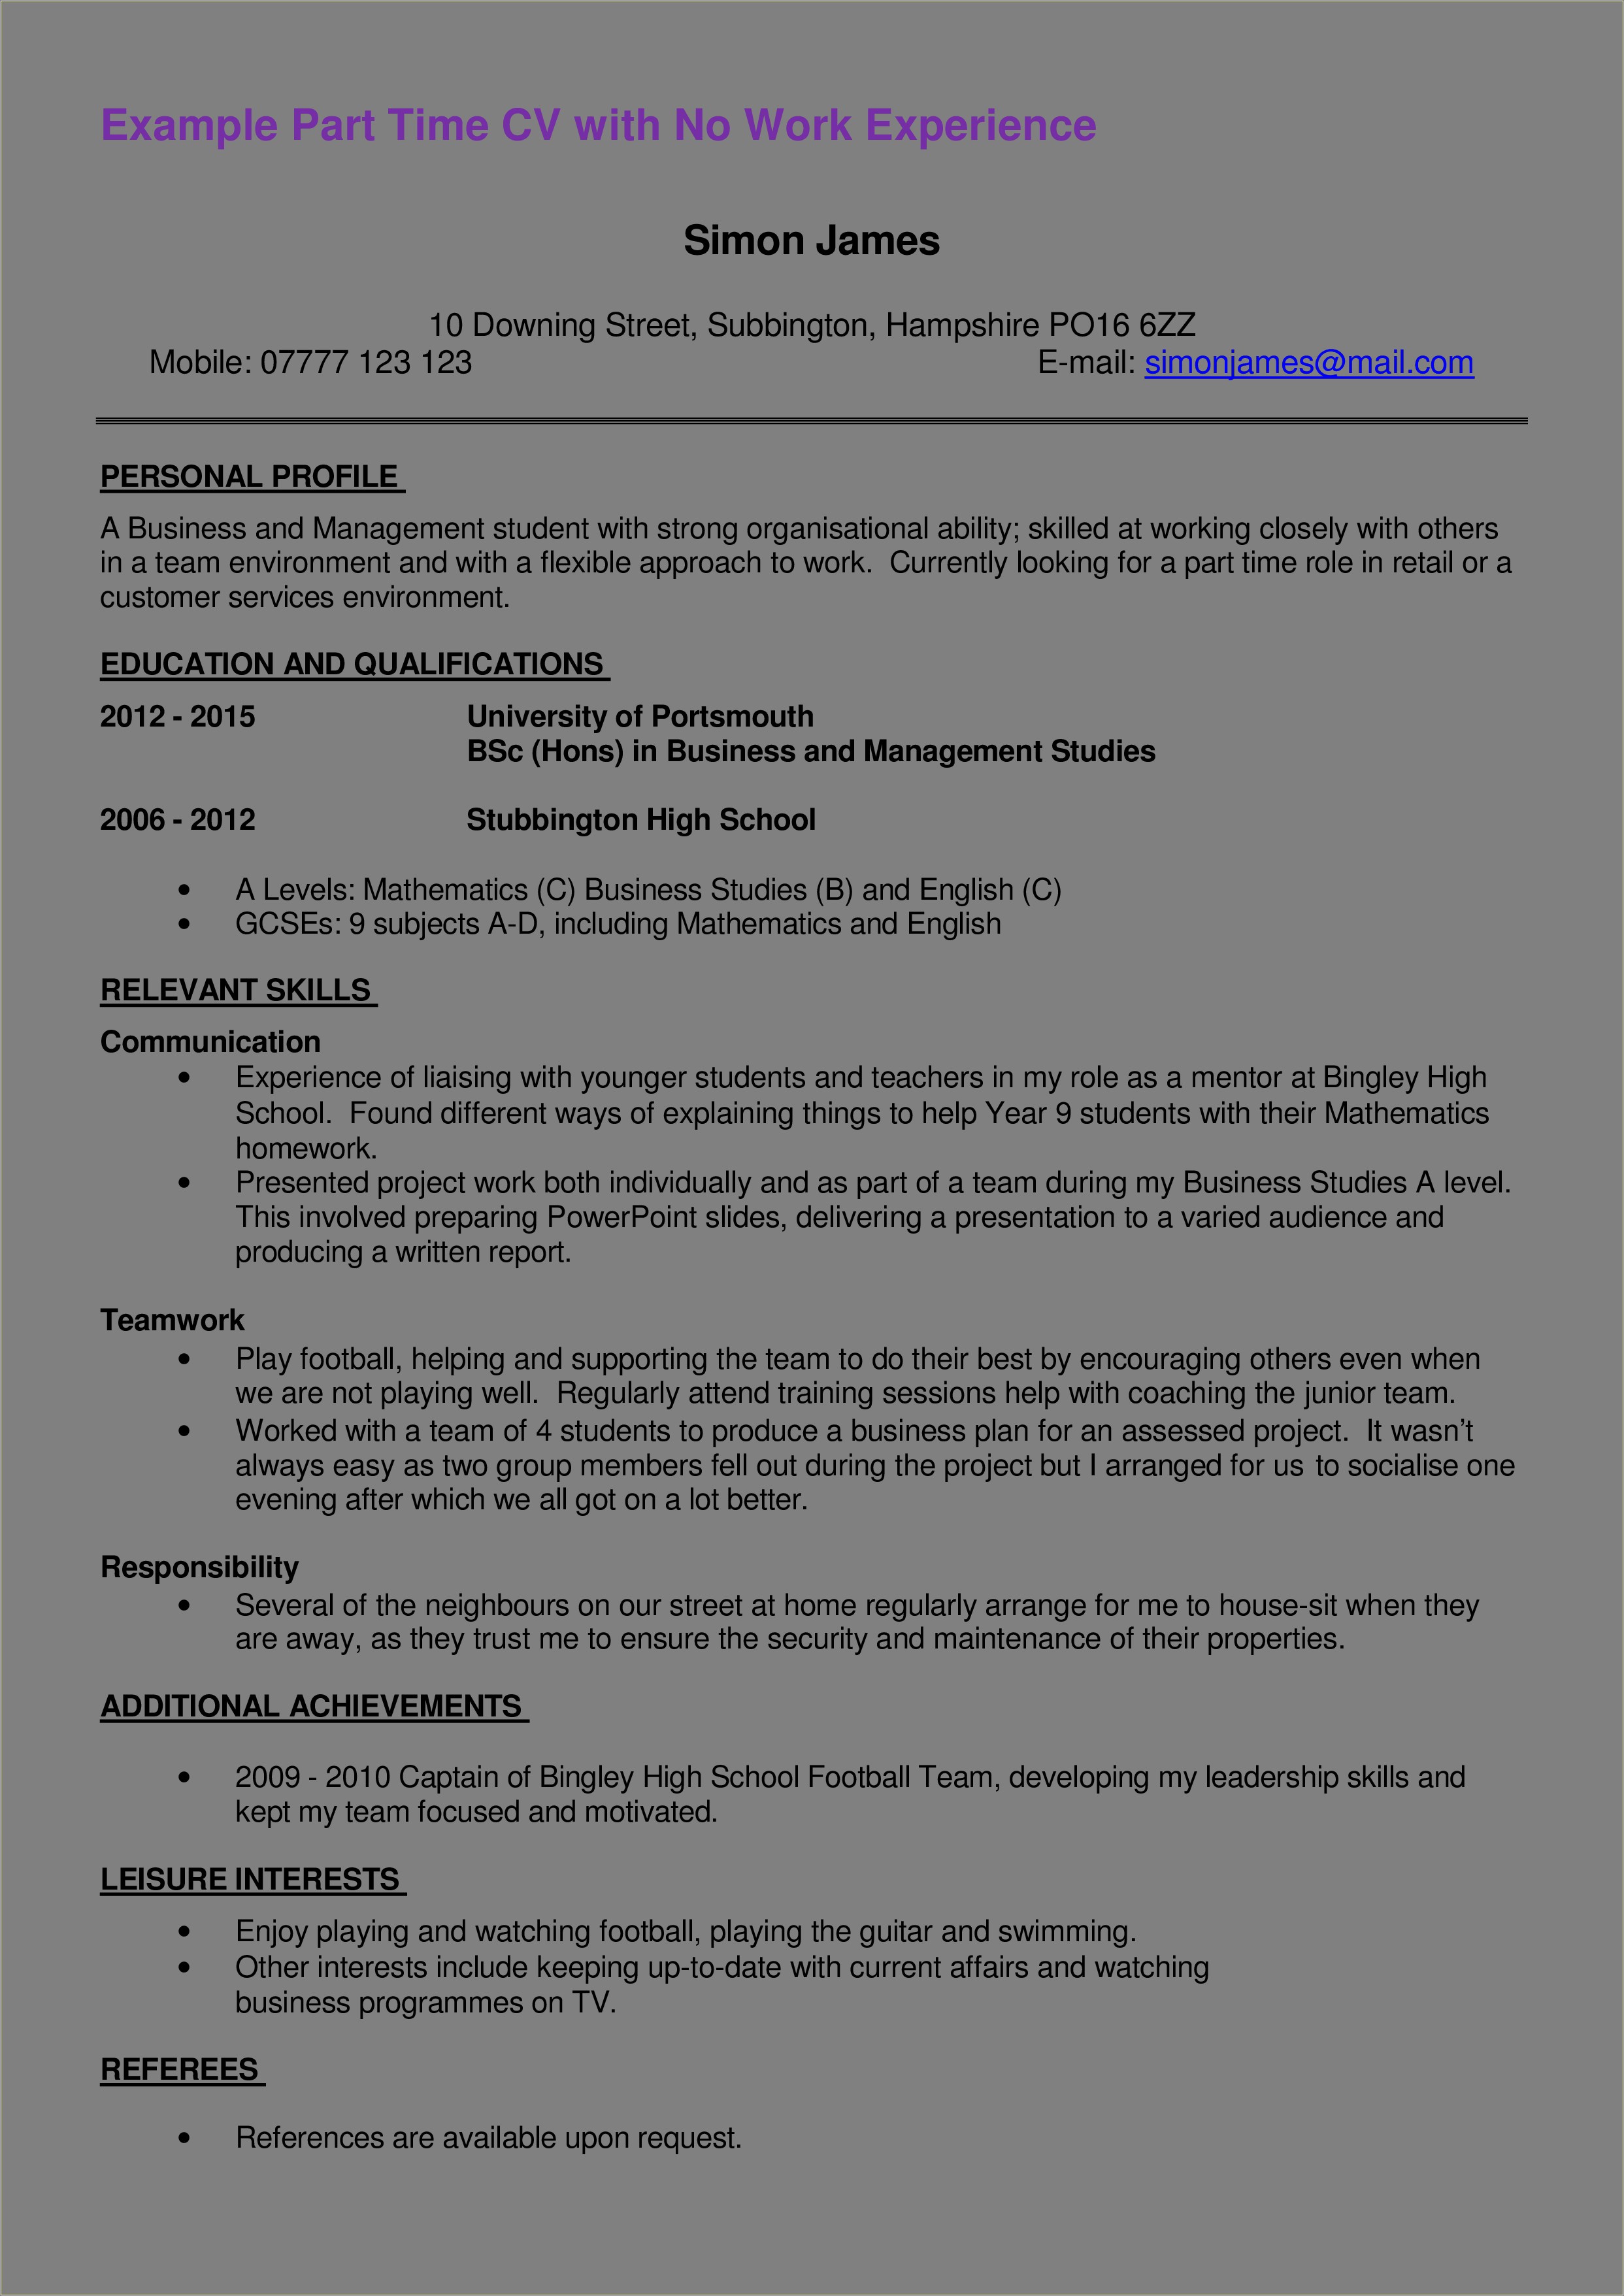 Generic Resume Objective For Part Time Job